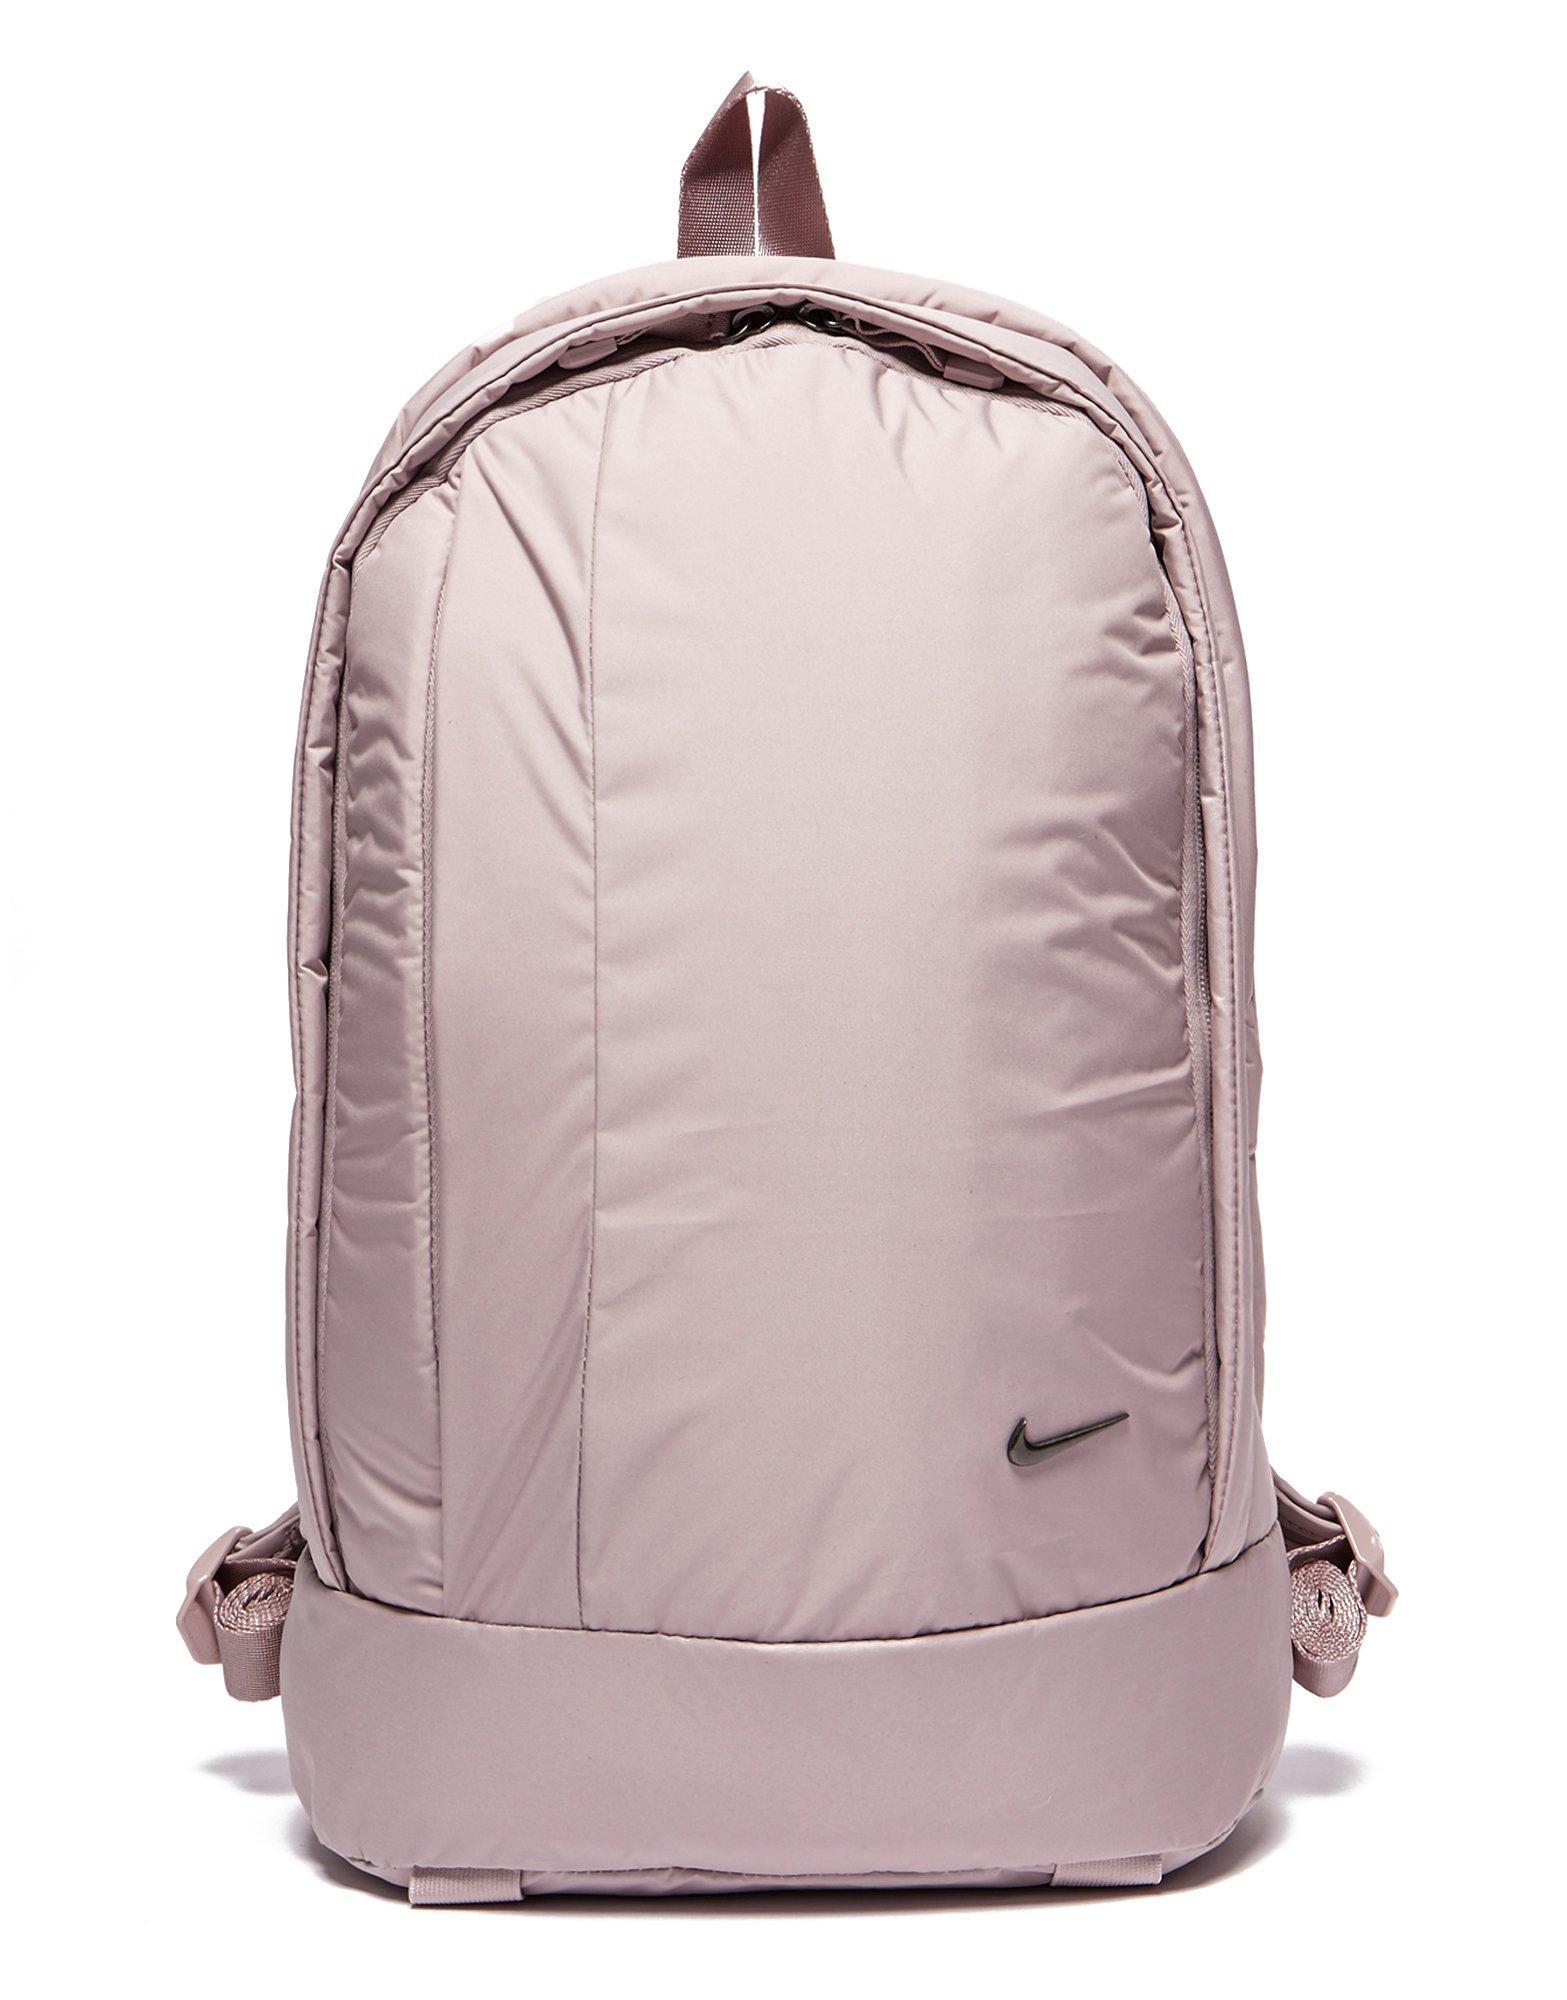 nike backpack grey and pink